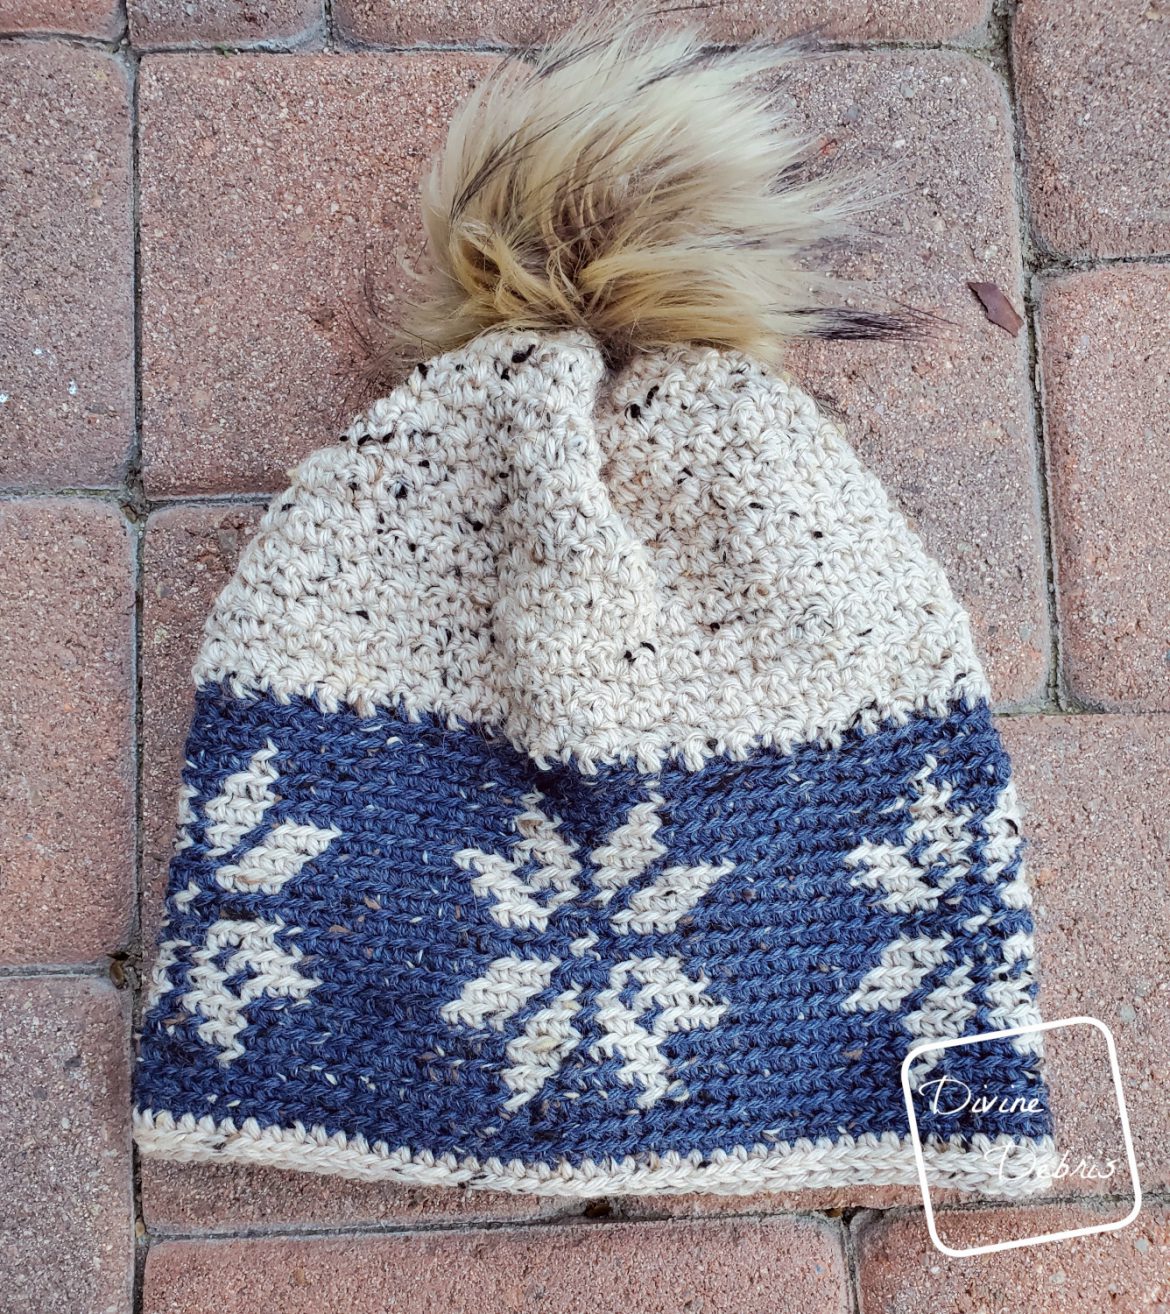 It’s Never Too Late for Snowflakes – the Dancing Snowflake Beanie